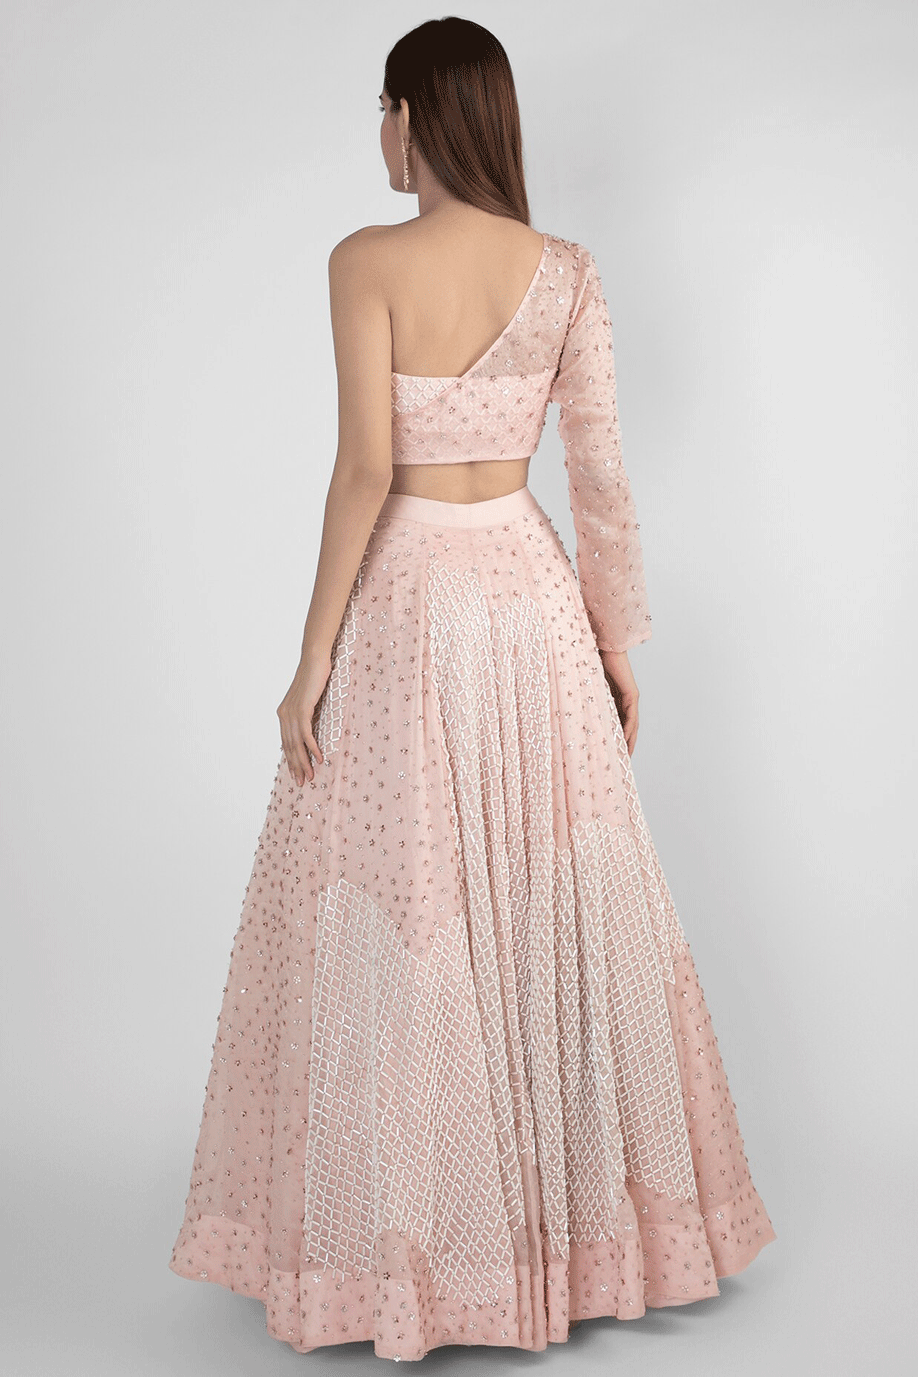 Peach Pink Embroidered Skirt With Crop Top